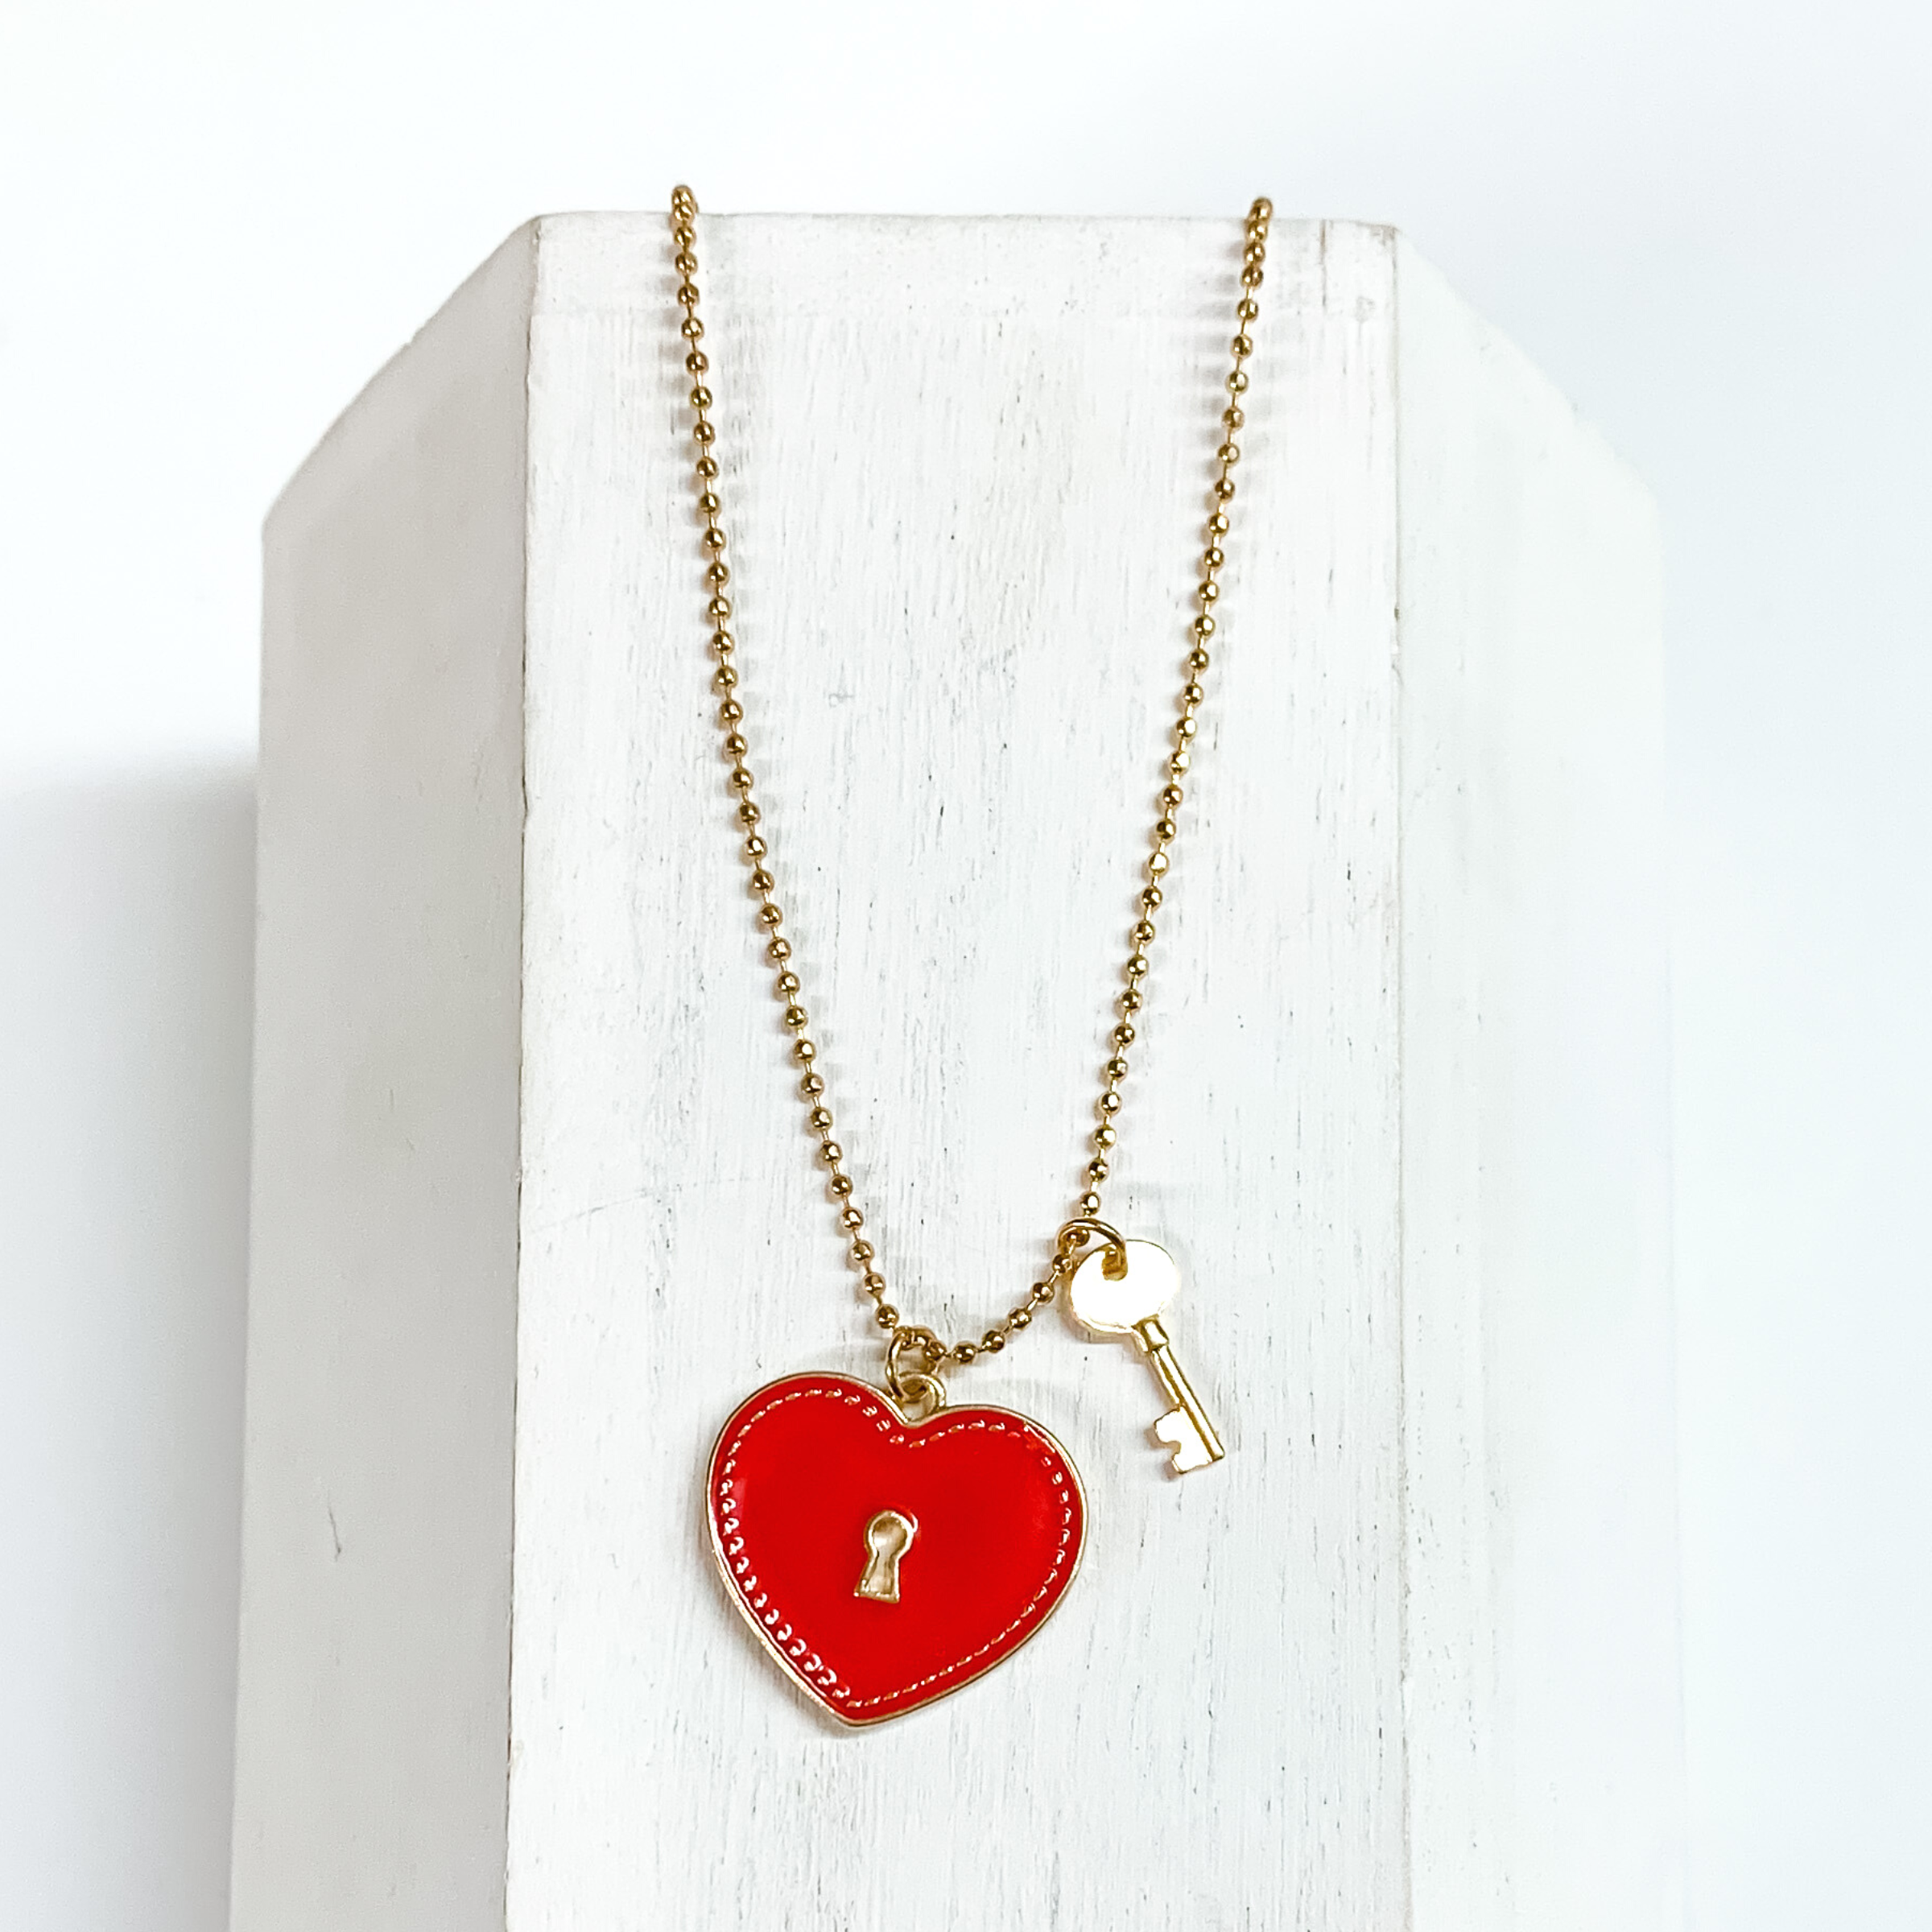 Gold, ball chain necklace with a red heart pendant and gold key charm. This necklace is pictured on a white block on a white background.